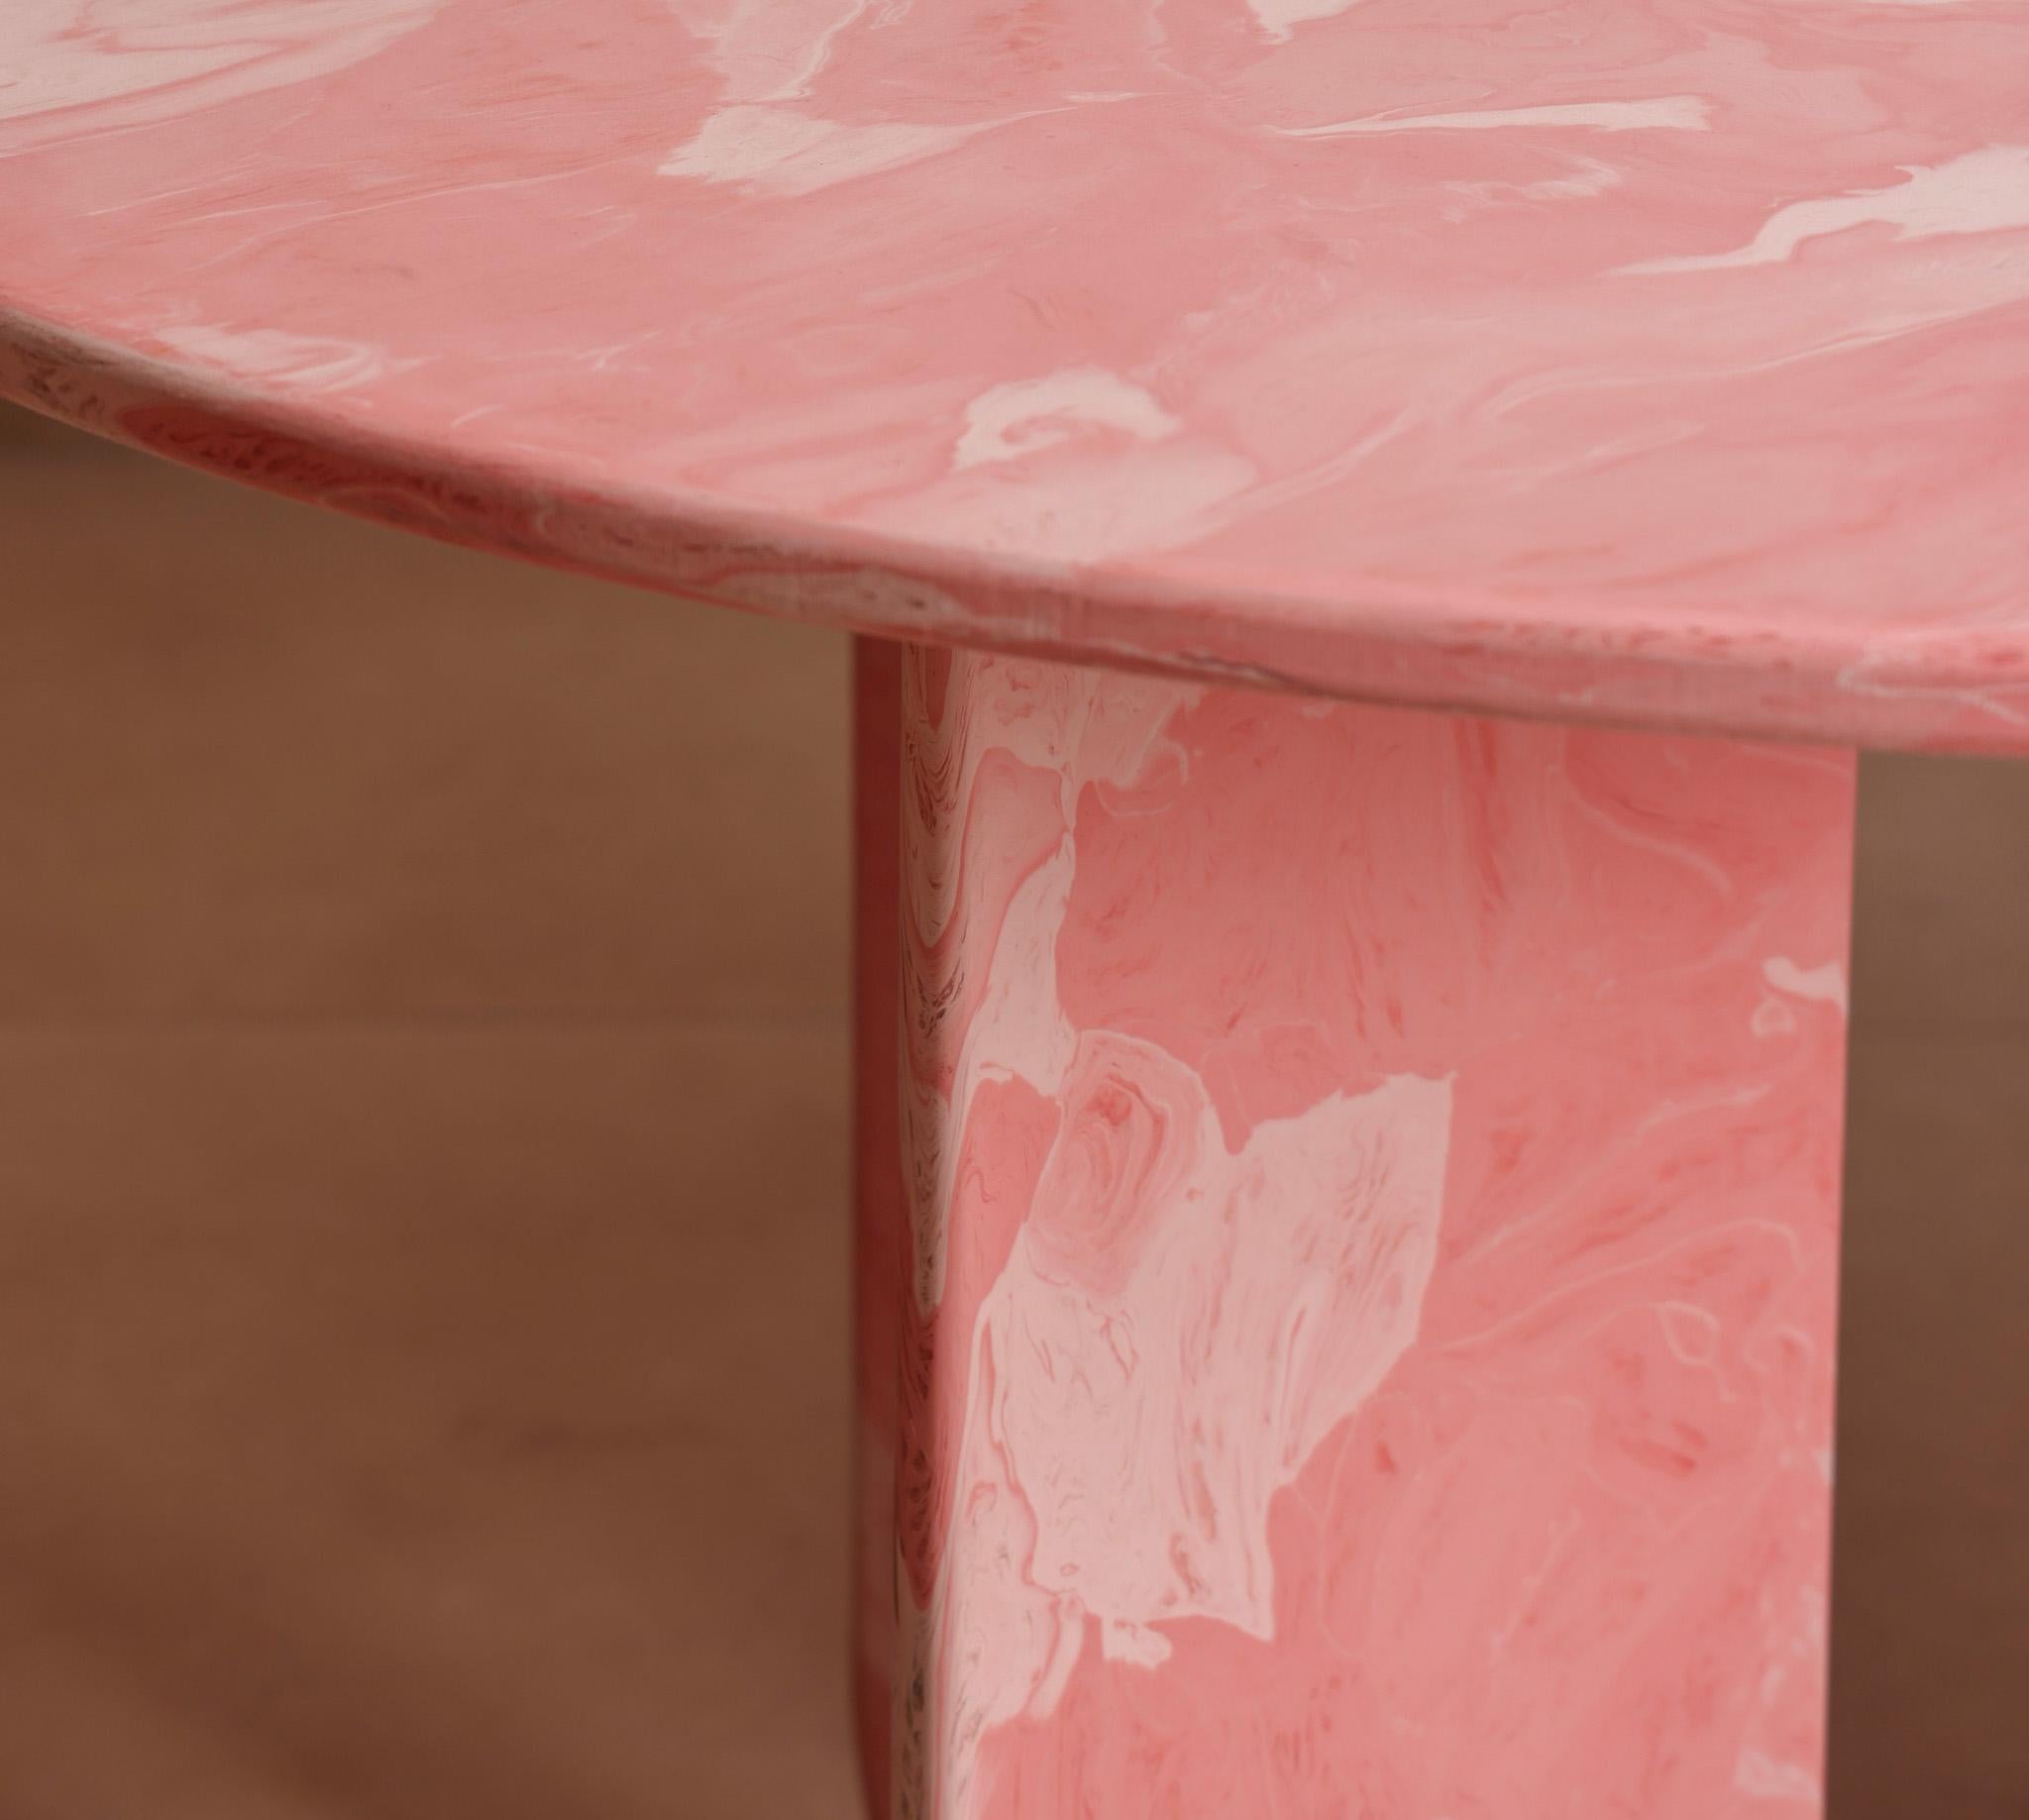 Modern Contemporary Pink Round Table Hand-Crafted 100% Recycled Plastic by Anqa Studios